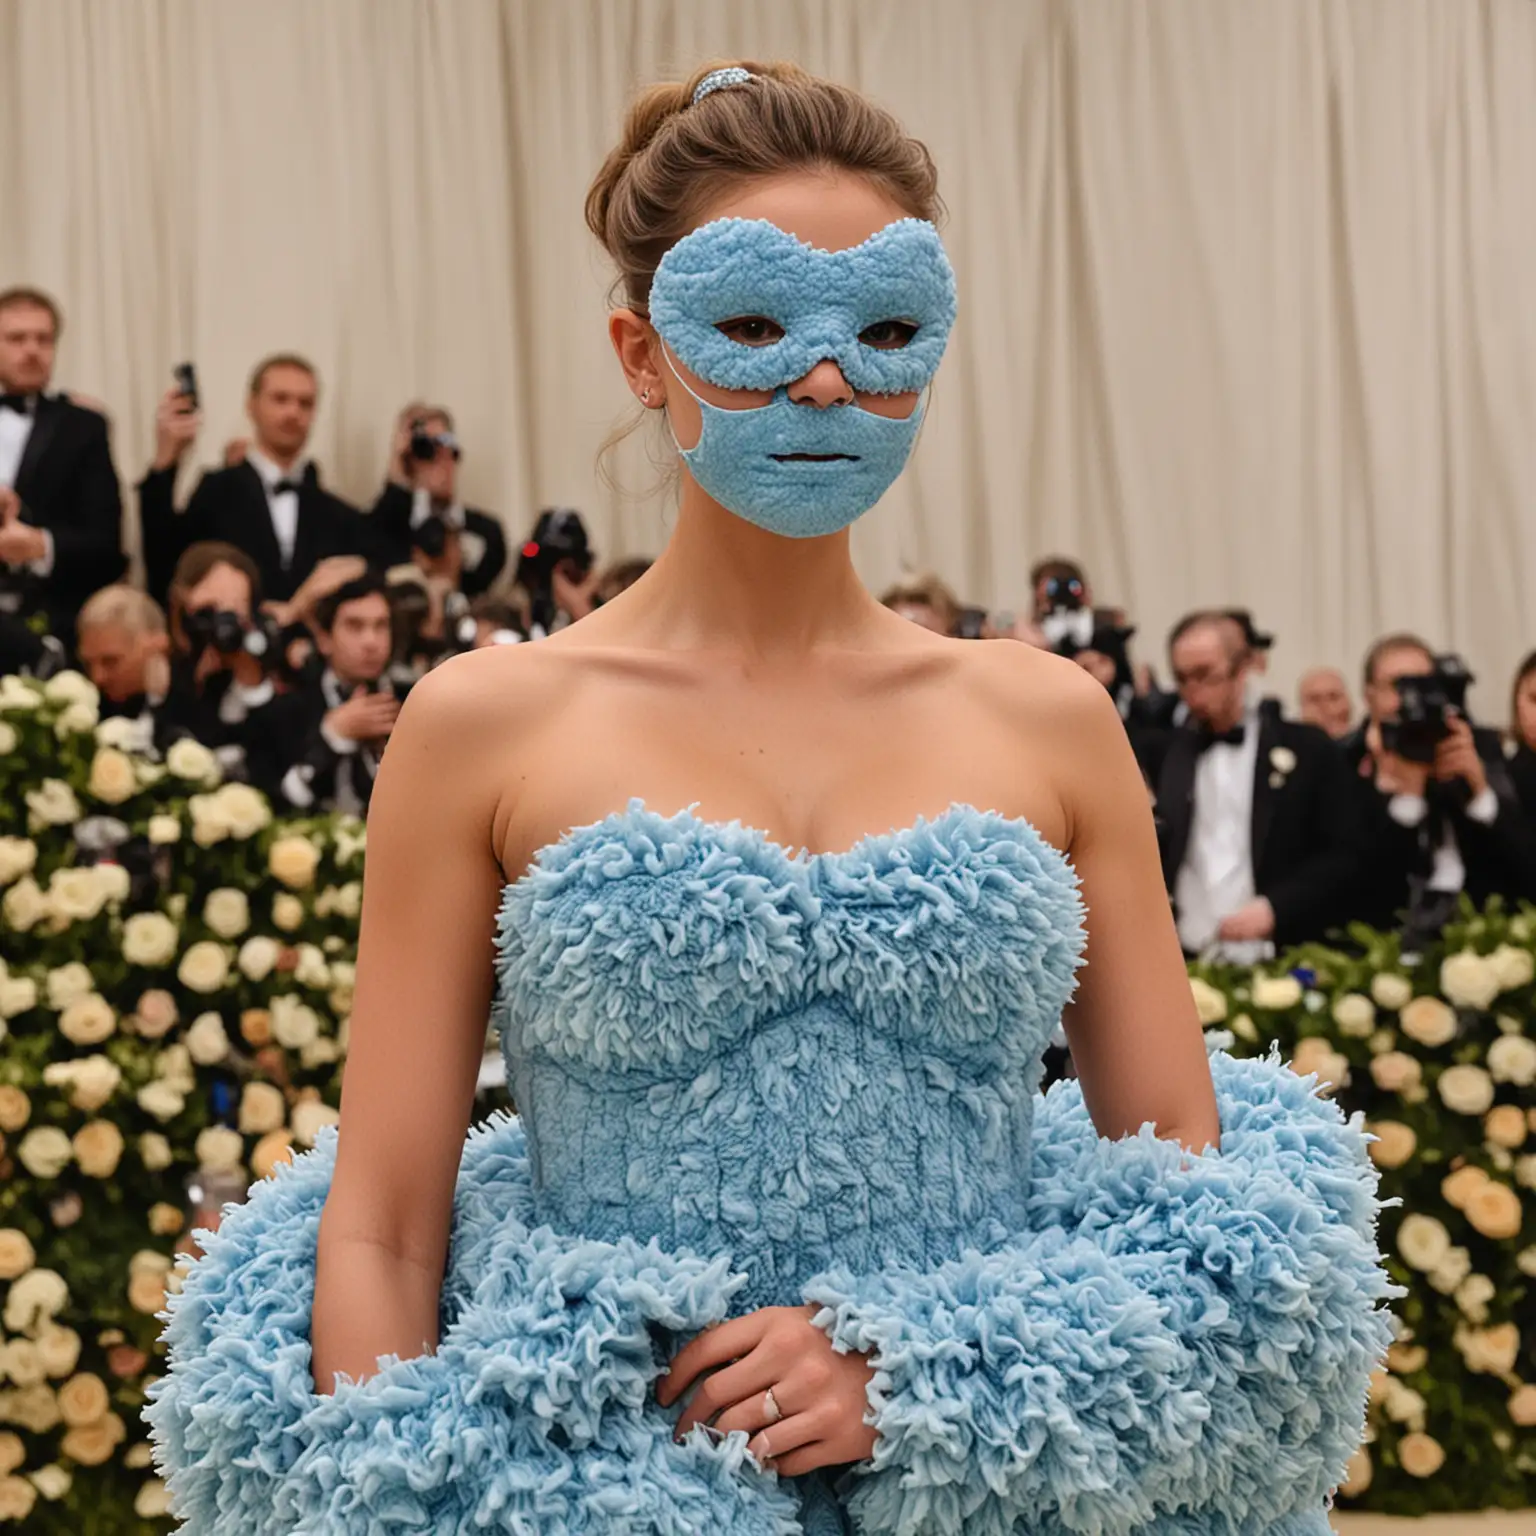 A model wearing a dress made out of blue fluffy pillows and wearing a sleeping mask at the Met Gala